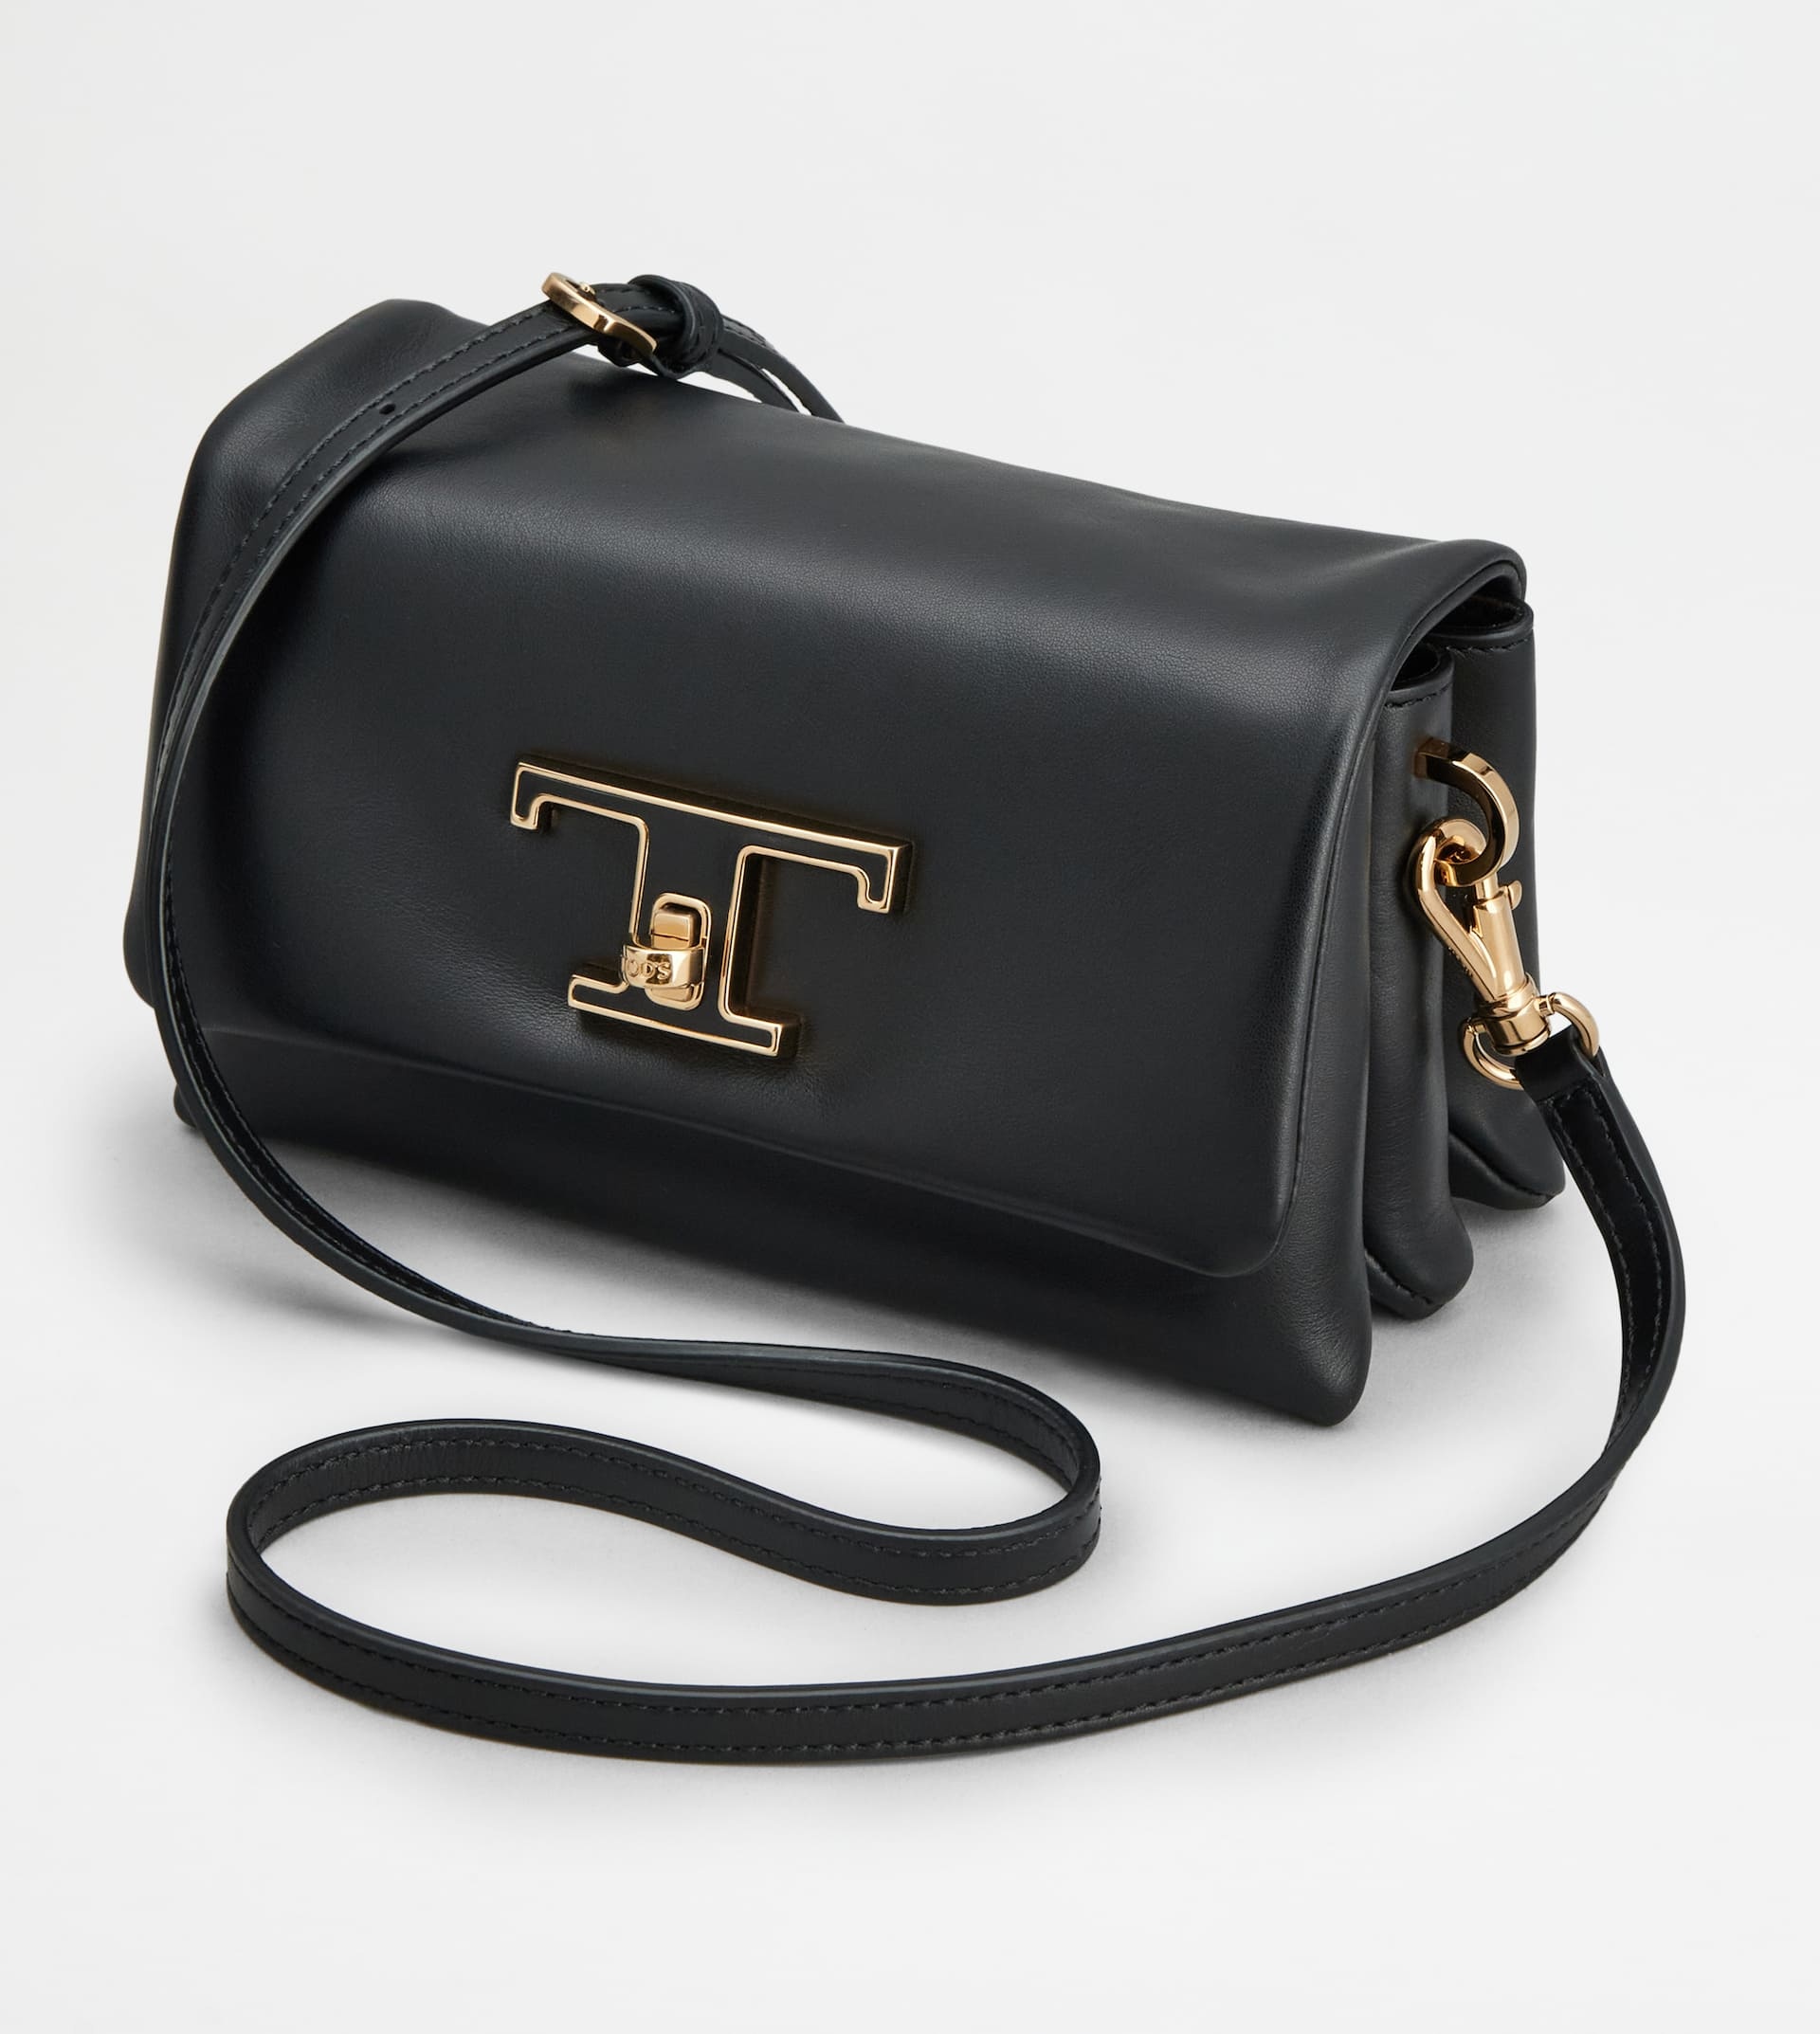 T TIMELESS FLAP BAG IN LEATHER MICRO - BLACK - 6